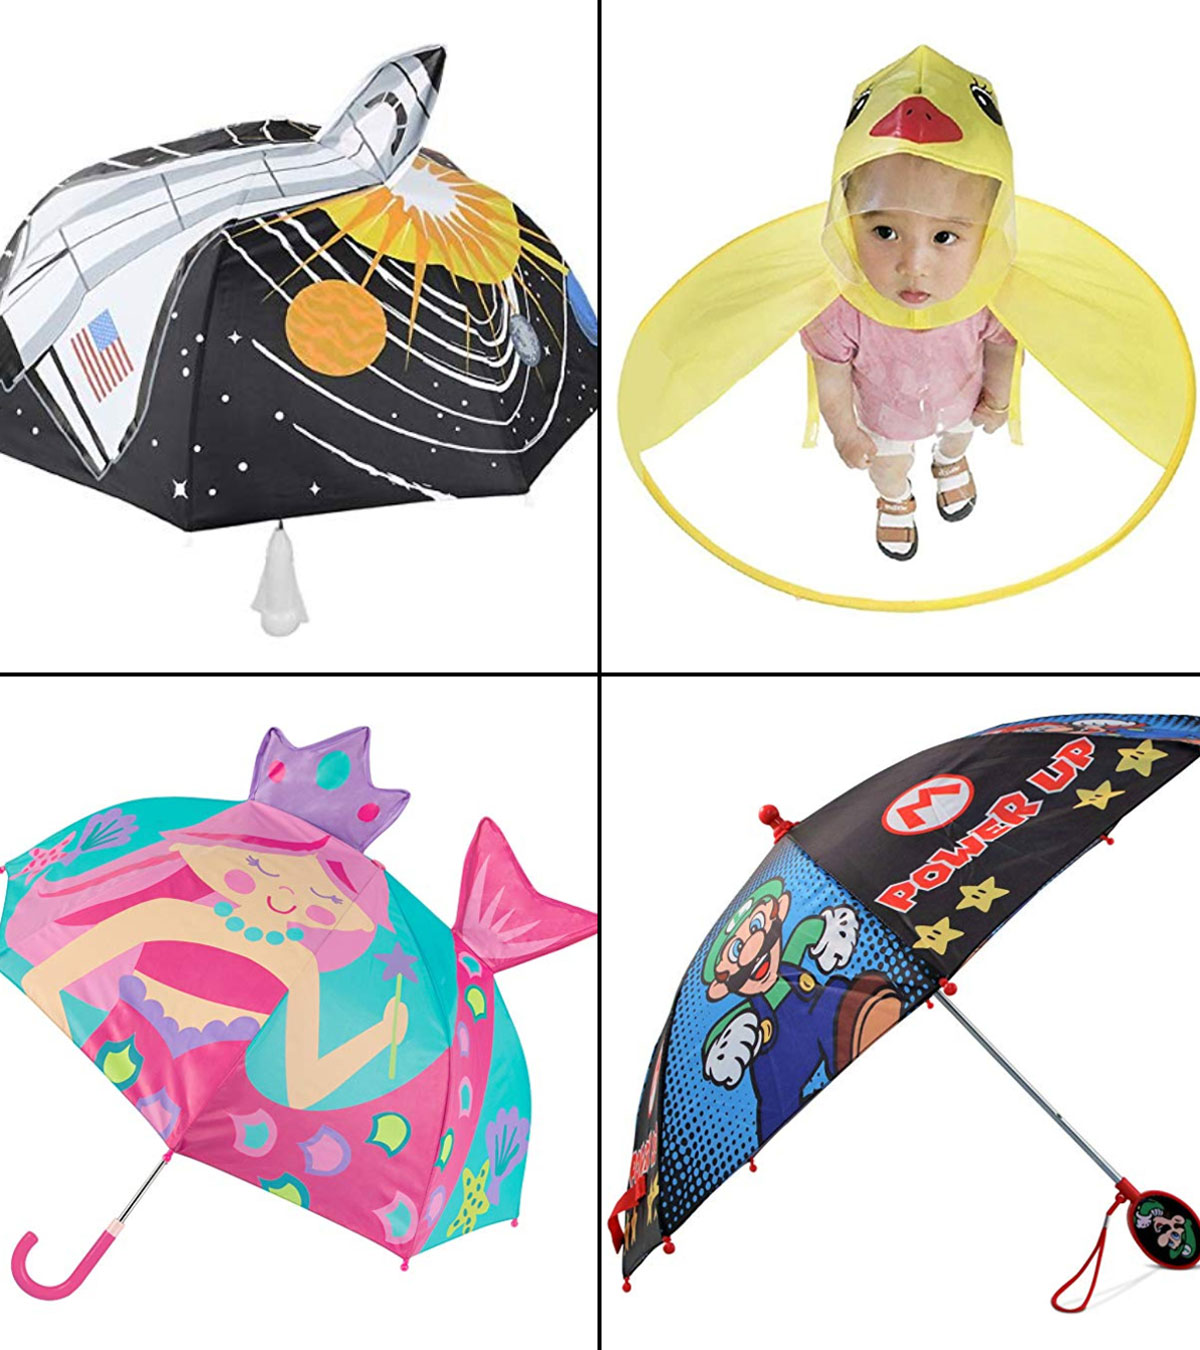 16 Best Umbrellas For Kids, With A Colorful Design In 2023